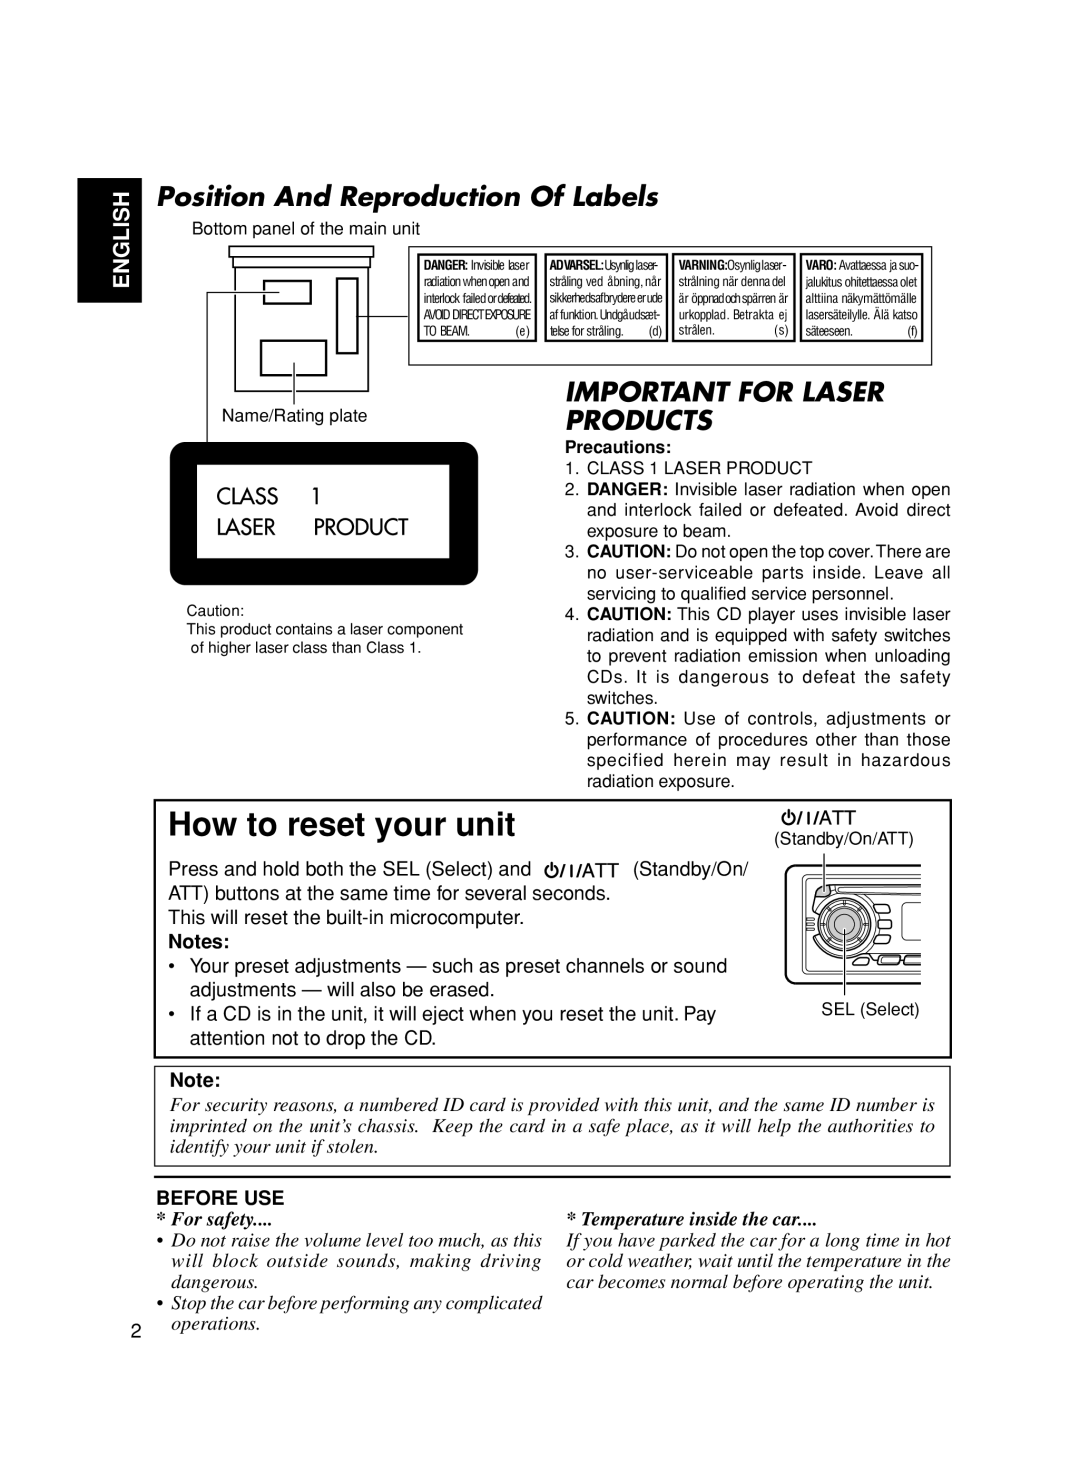 JVC KD-S8R Position And Reproduction Of Labels, Important For Laser Products, How to reset your unit, English, Before Use 